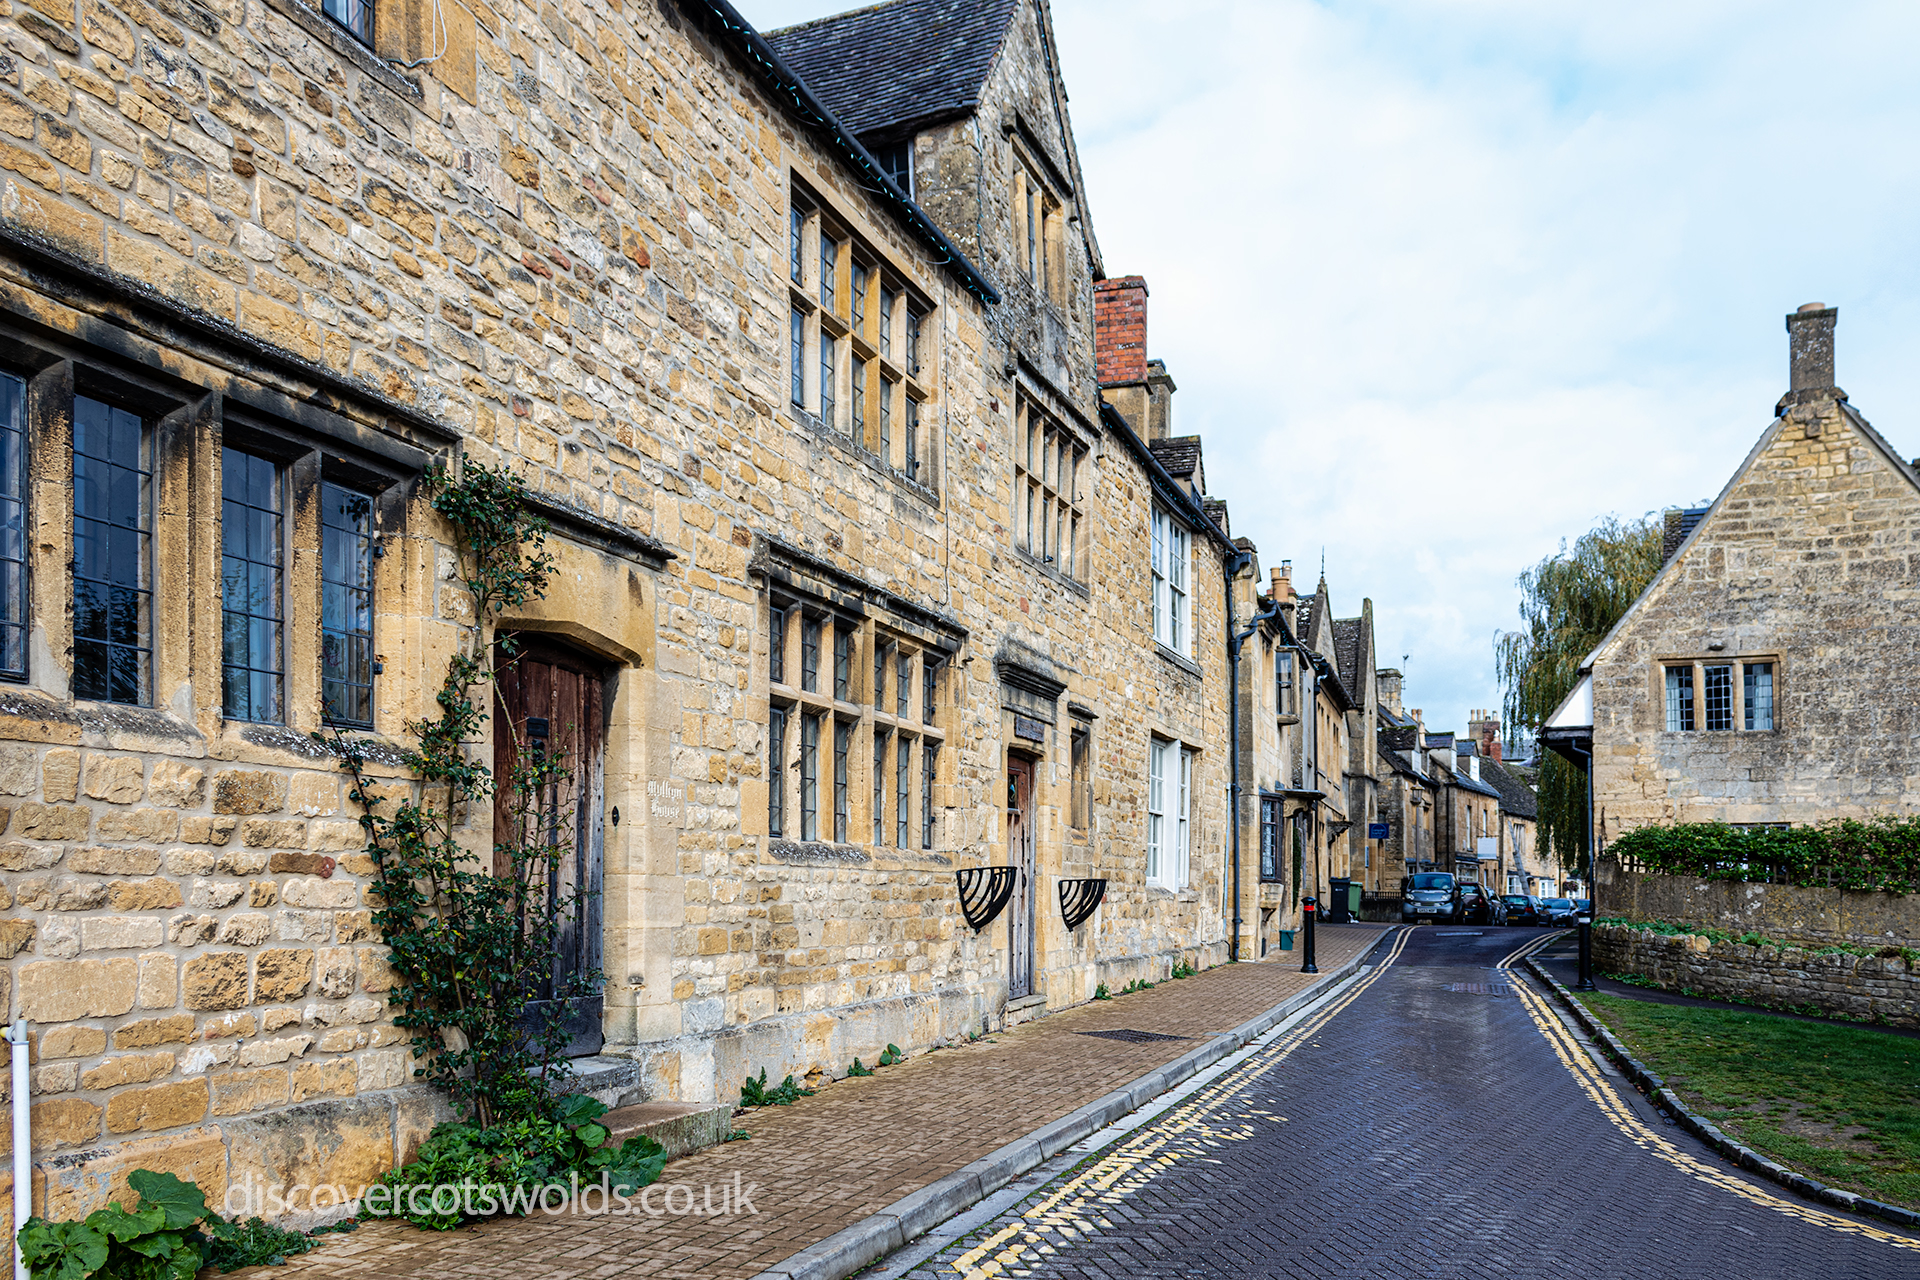 Houses in Chipping Campden